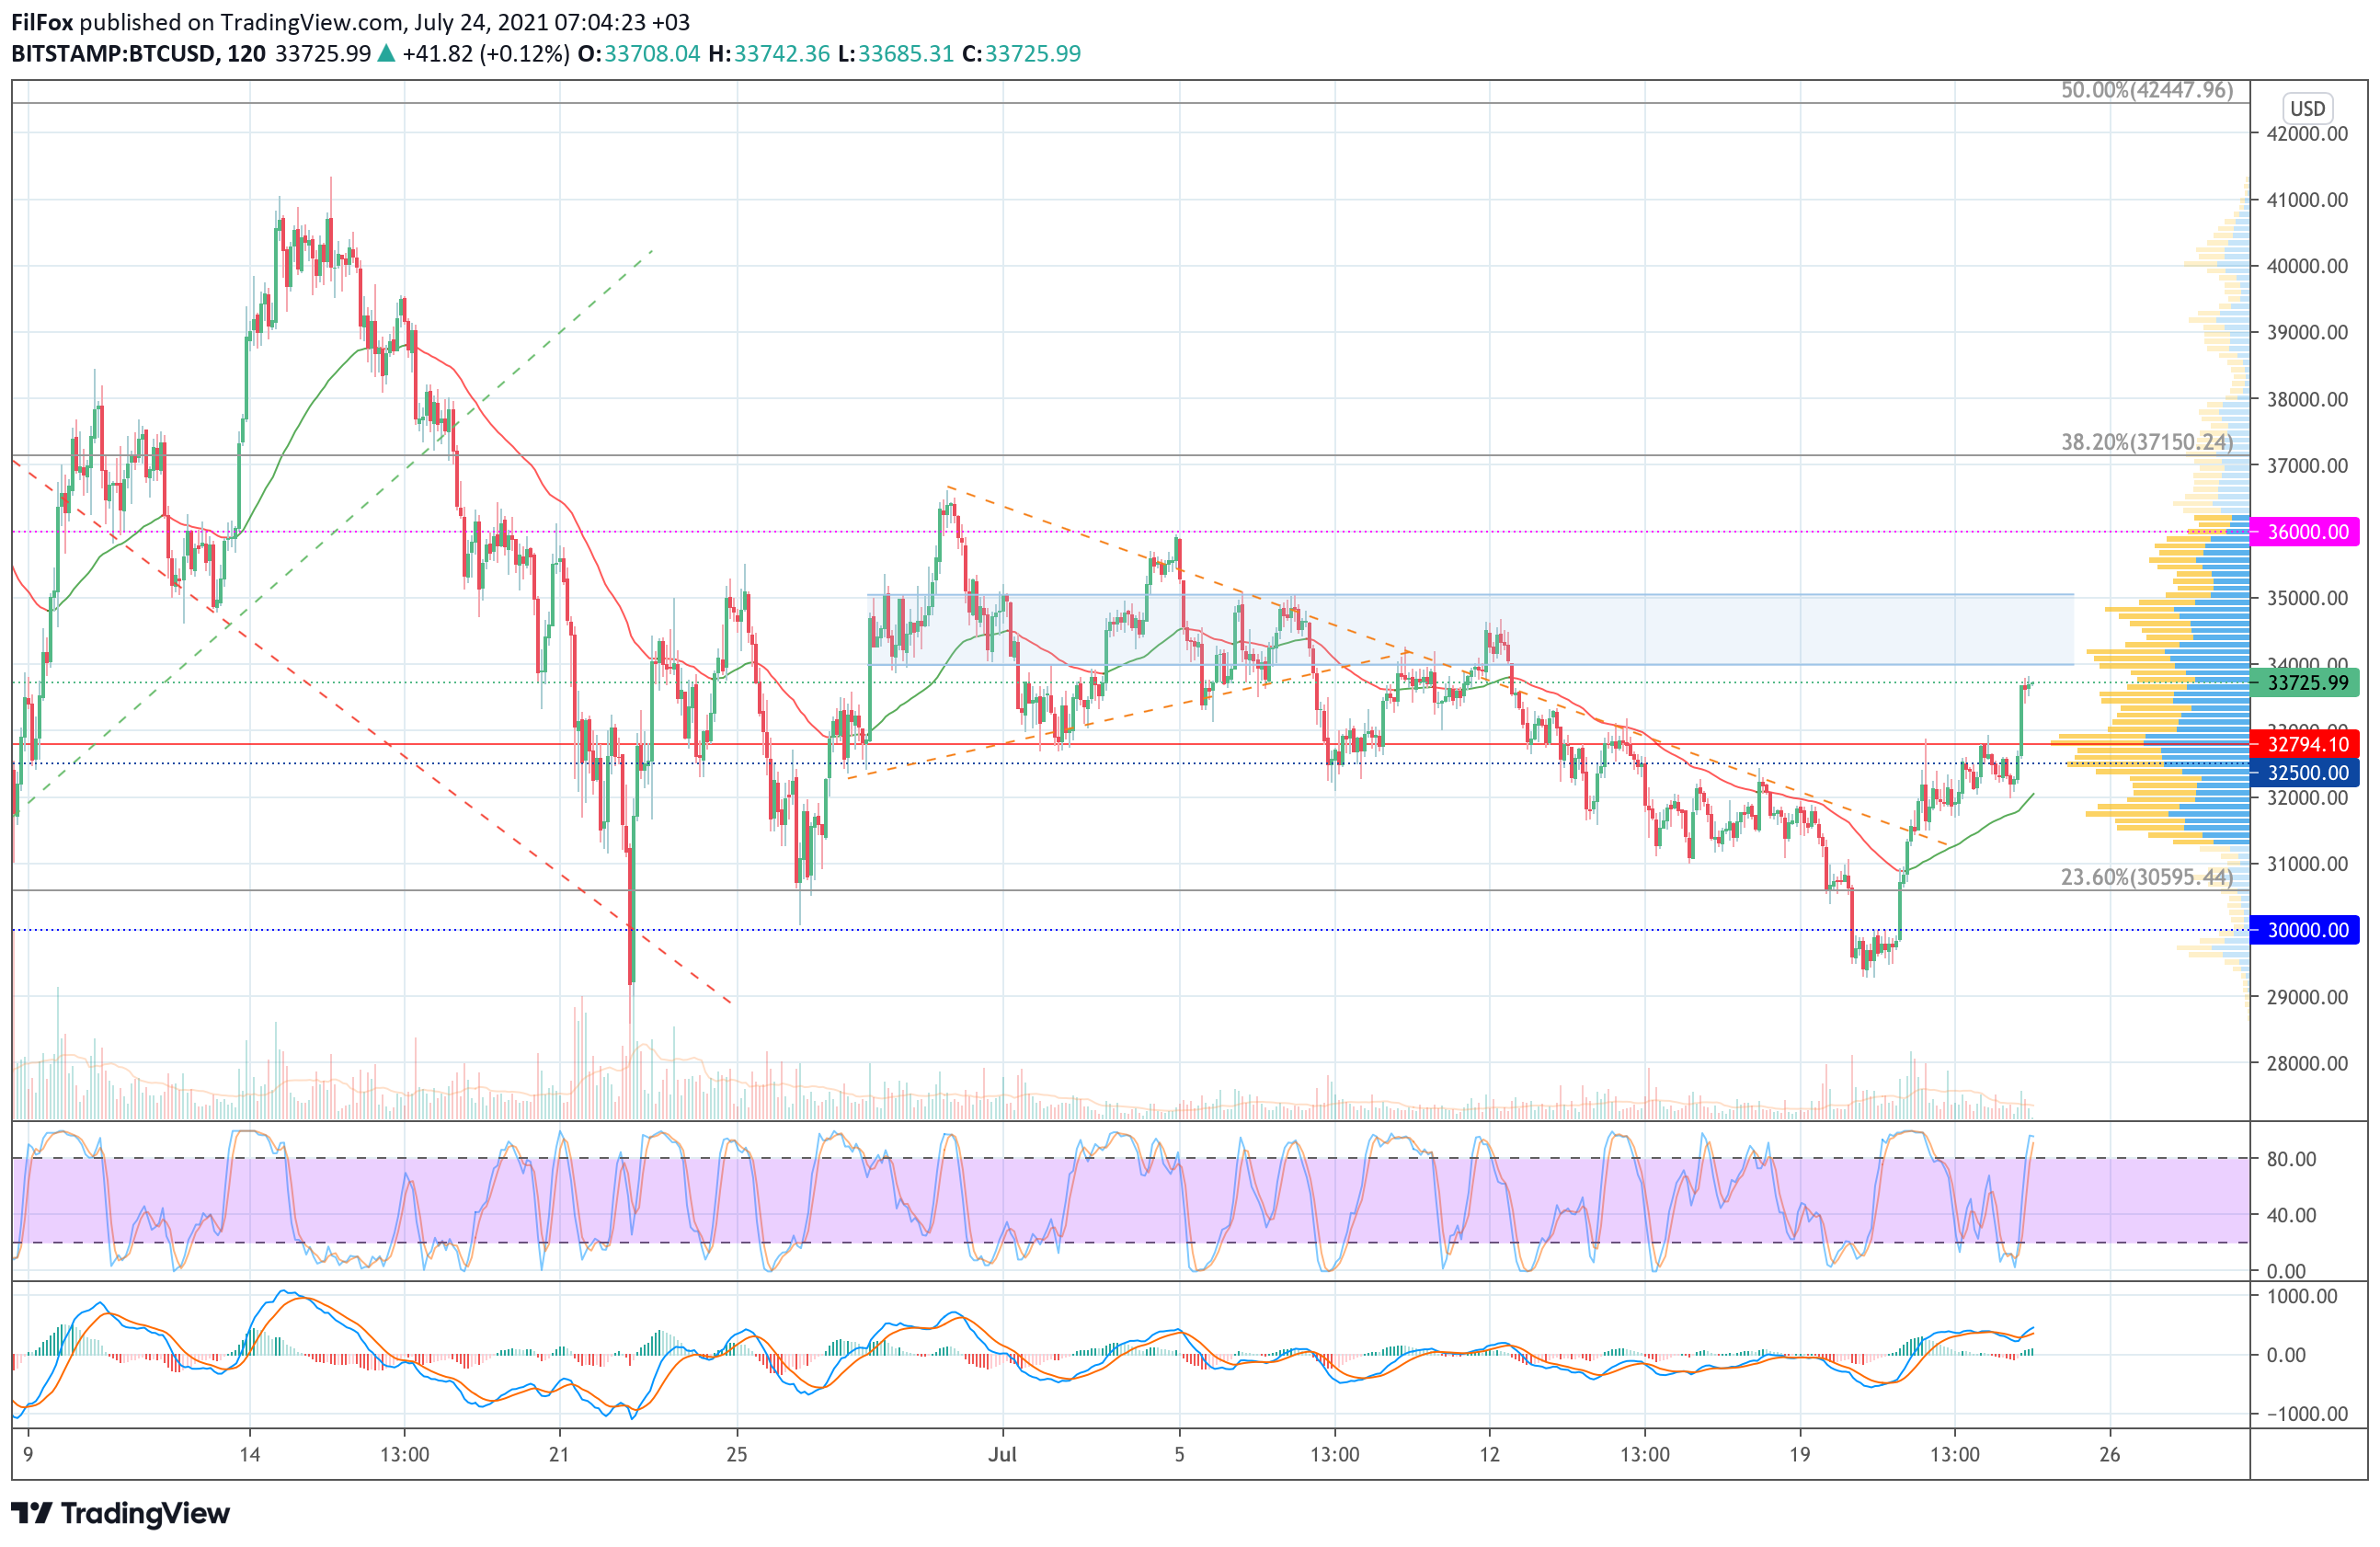 Analysis of prices for Bitcoin, Ethereum, XRP for 07/24/2021